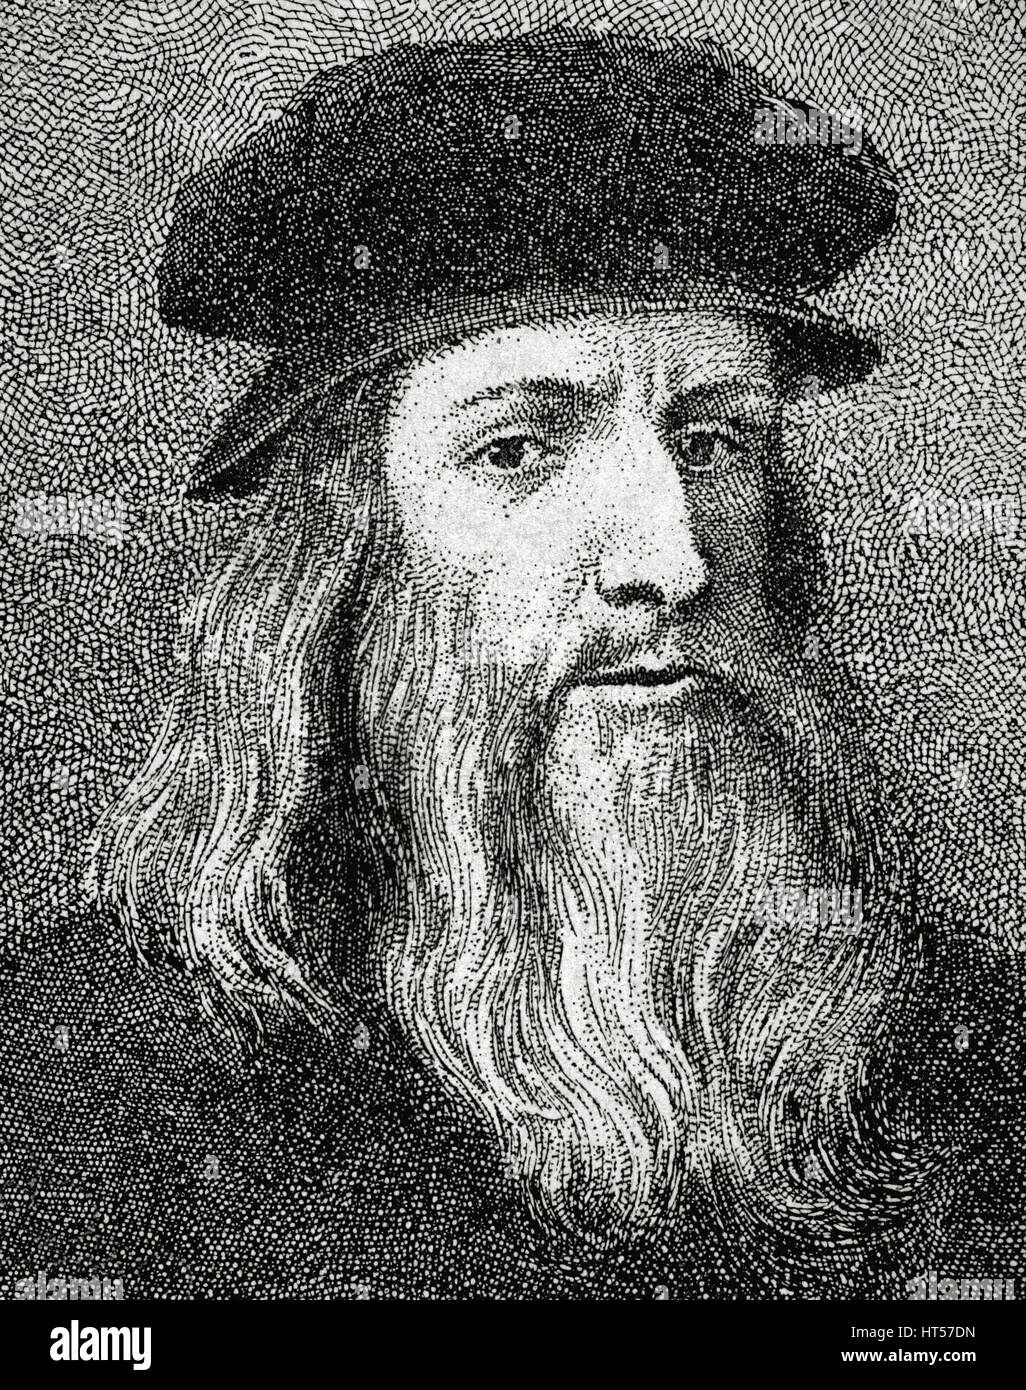 Leonardo da Vinci (1452-1519). Italian polymath known for his works in invention, painting, sculpting, architecture, science, music, mathematics, engineering, literature, anatomy, geology, astronomy, botany, writing, history, and cartography. Renaissance era. Portrait. Engraving by J. Dieguez. "La Ilustración Artística", 1896. Stock Photo